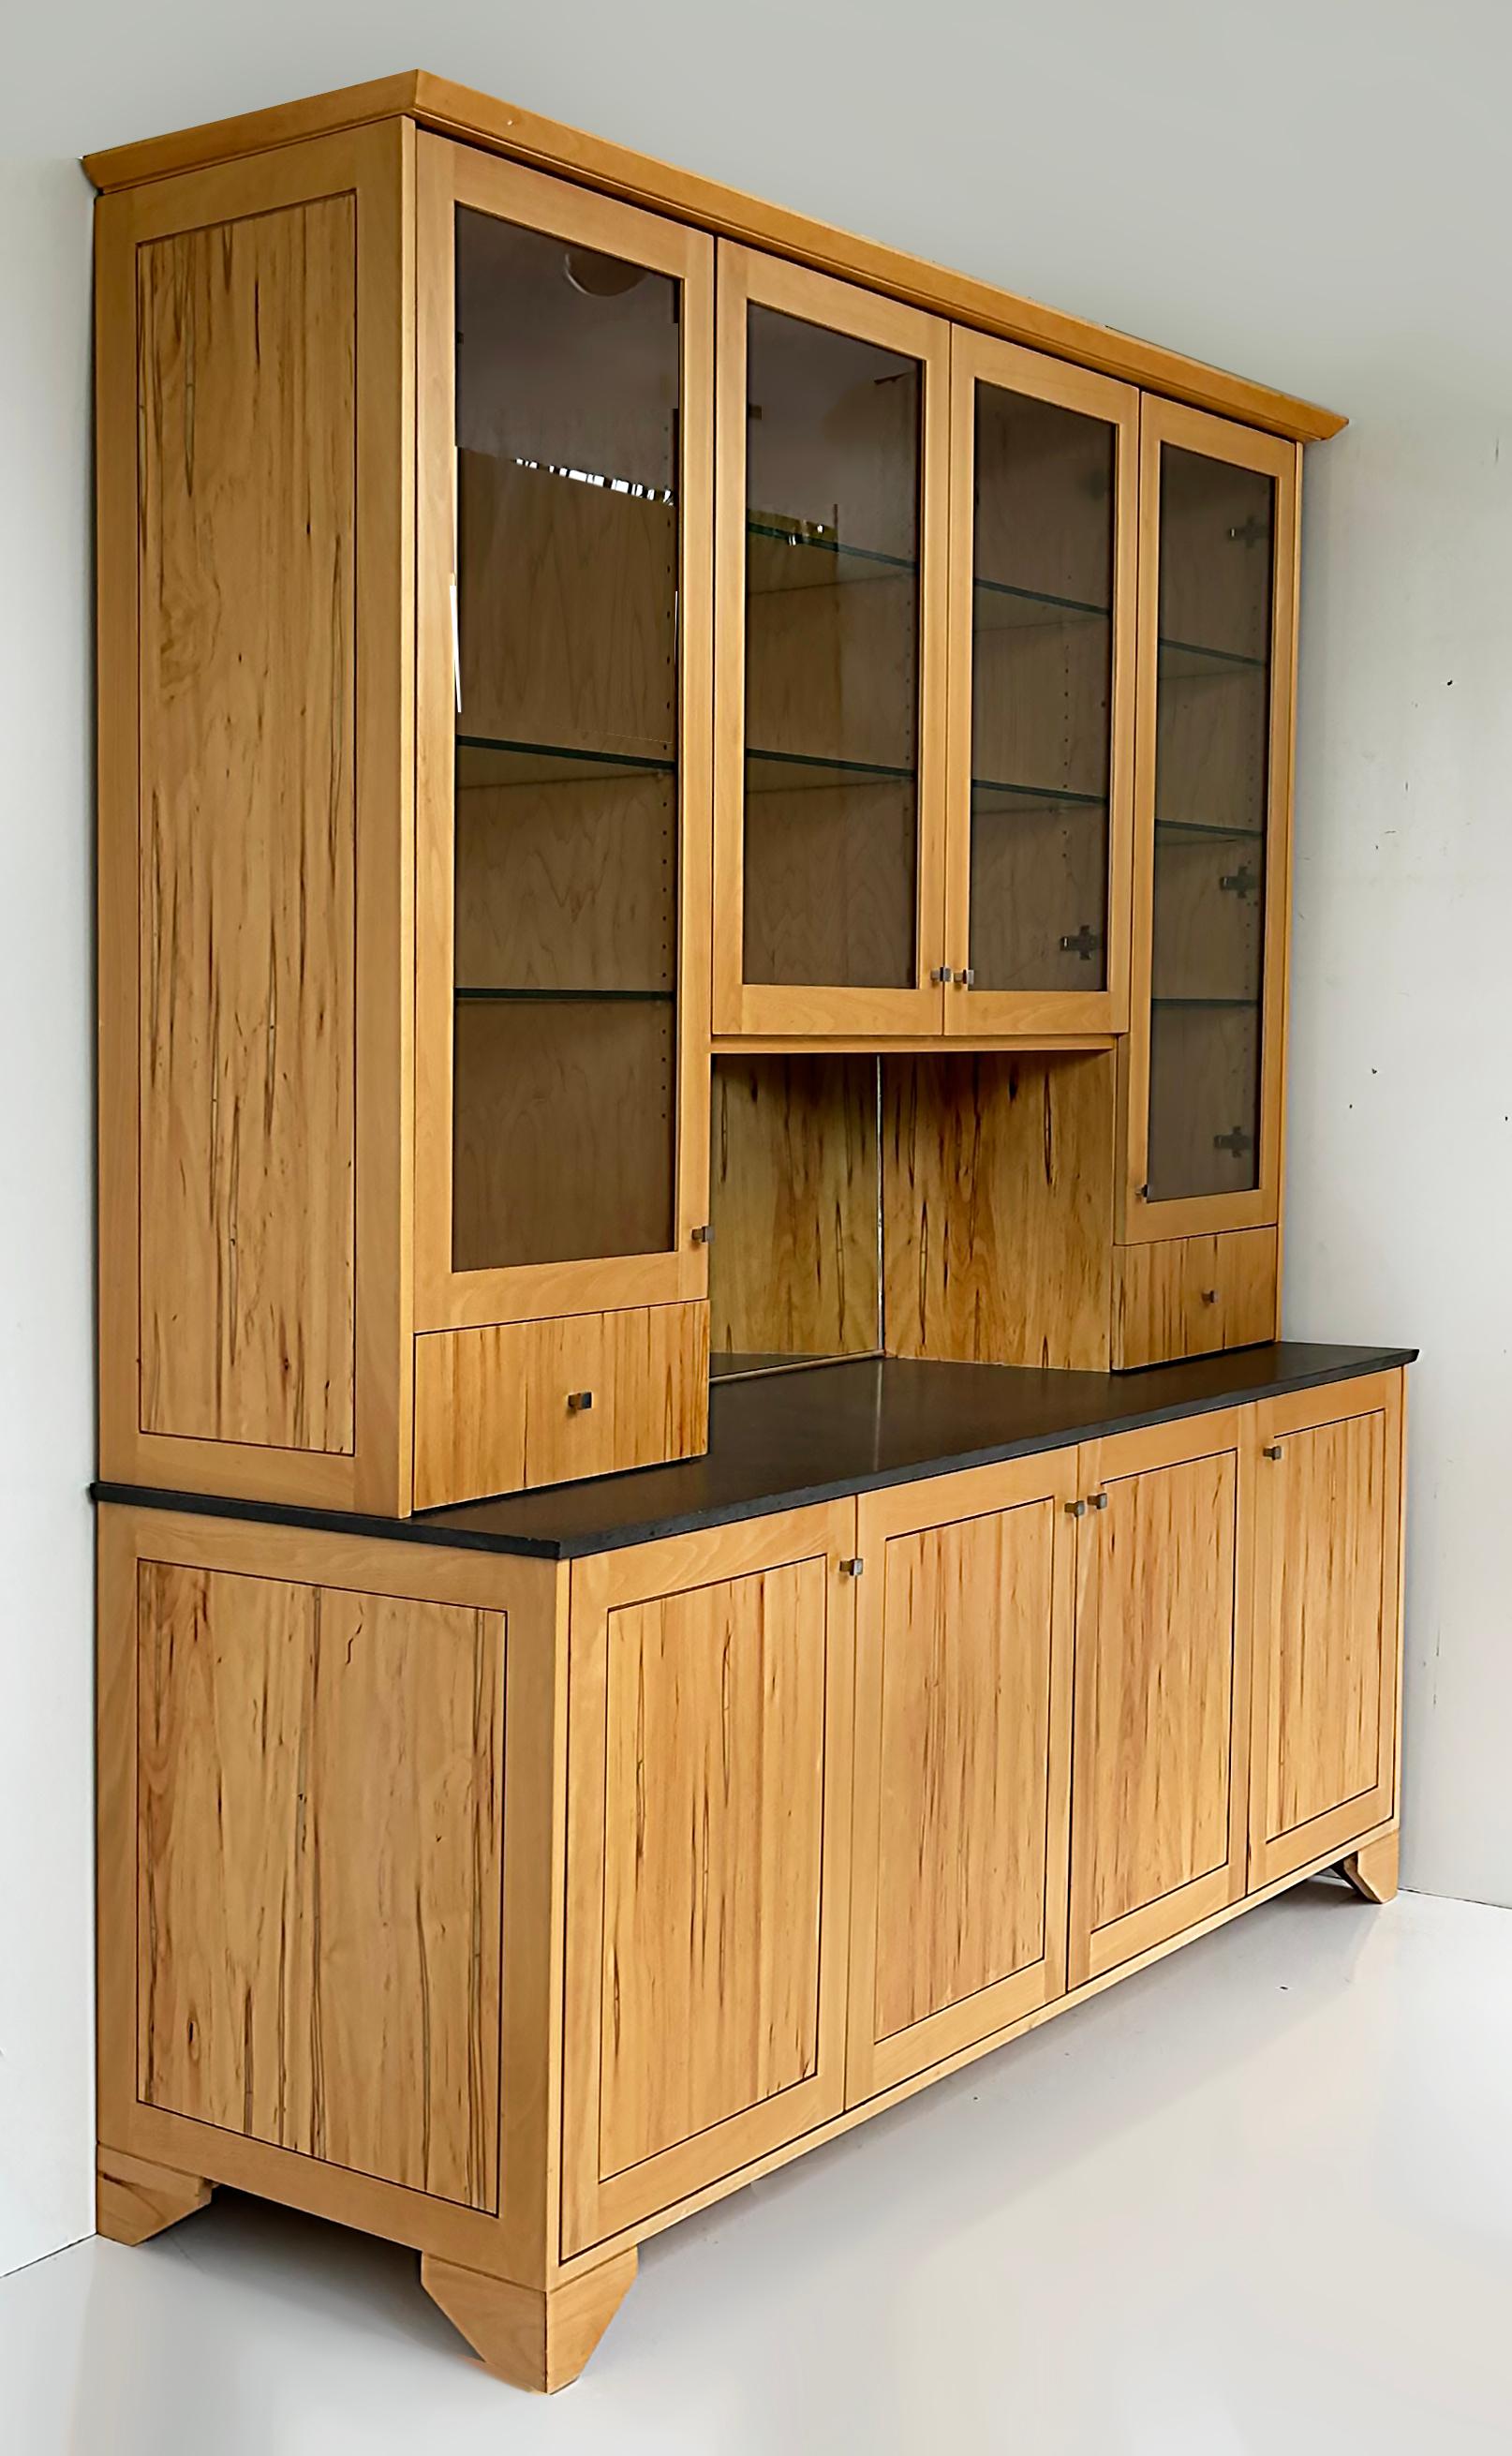 Ray Pirello Studio Maple Wood and Granite Custom Cabinet 

Offered for sale is a custom-crafted breakfront bar cabinet with a lower credenza constructed using premium domestic ambrosia maple with a clear polyurethane finish. The drawers are solid